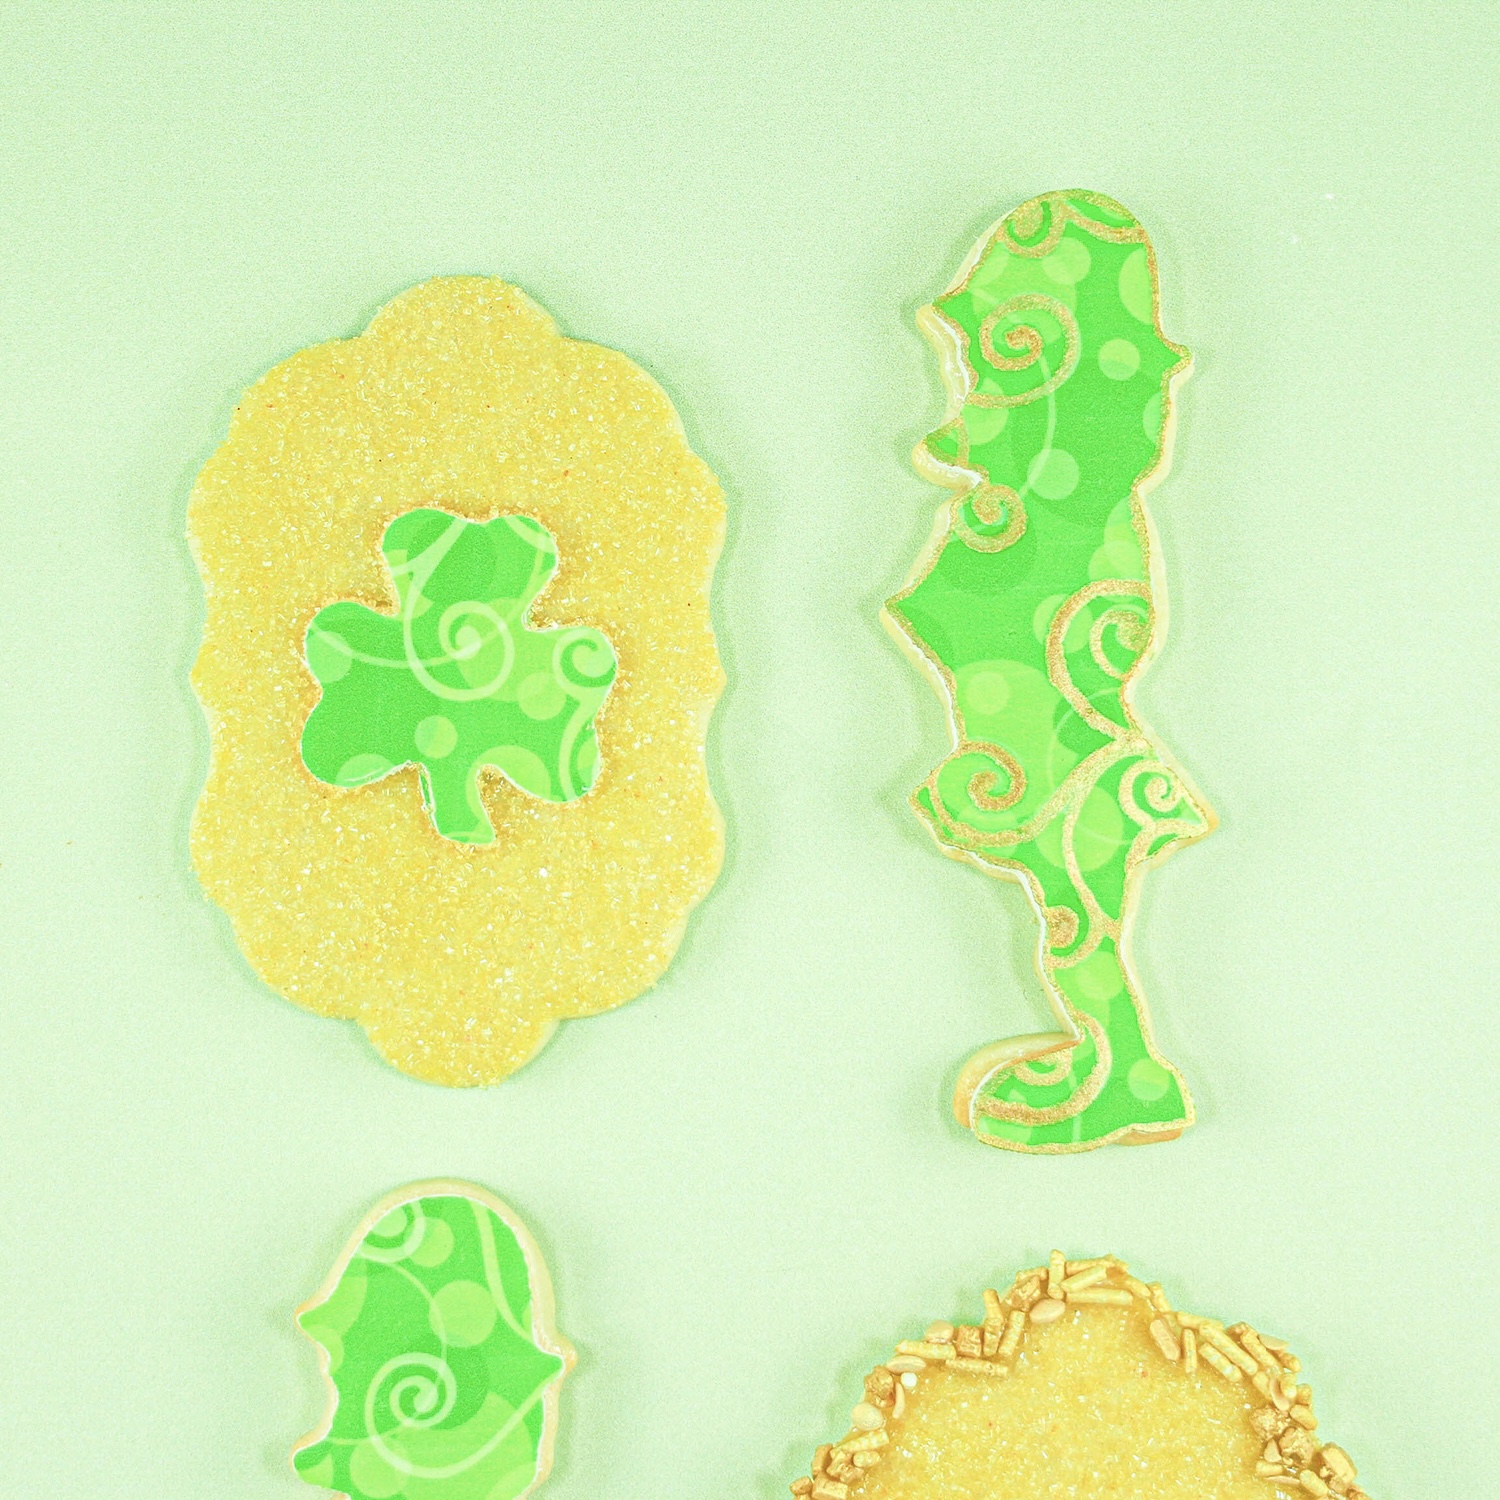 edible image cut shamrock in the middle of a plaque cookie, dipped in gold sanding sugar and a border of gold jimmies and sequins outline the cookie.